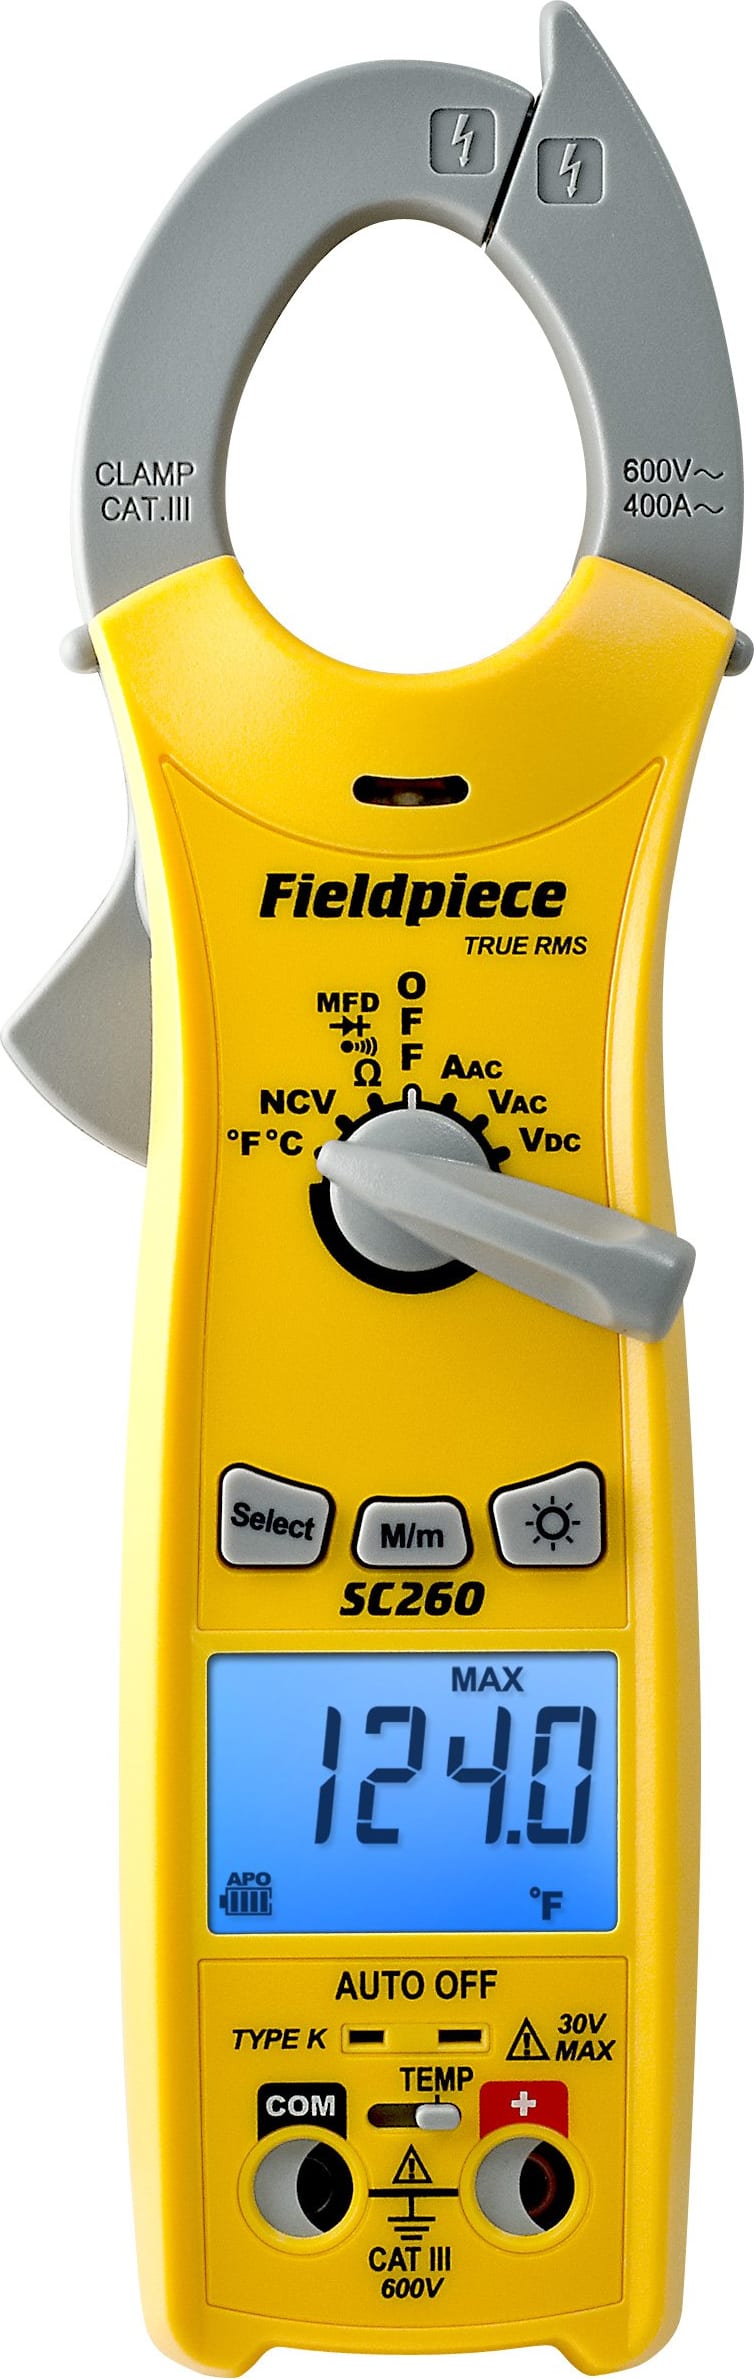 Fieldpiece SC260 Compact Clamp Meter with True RMS